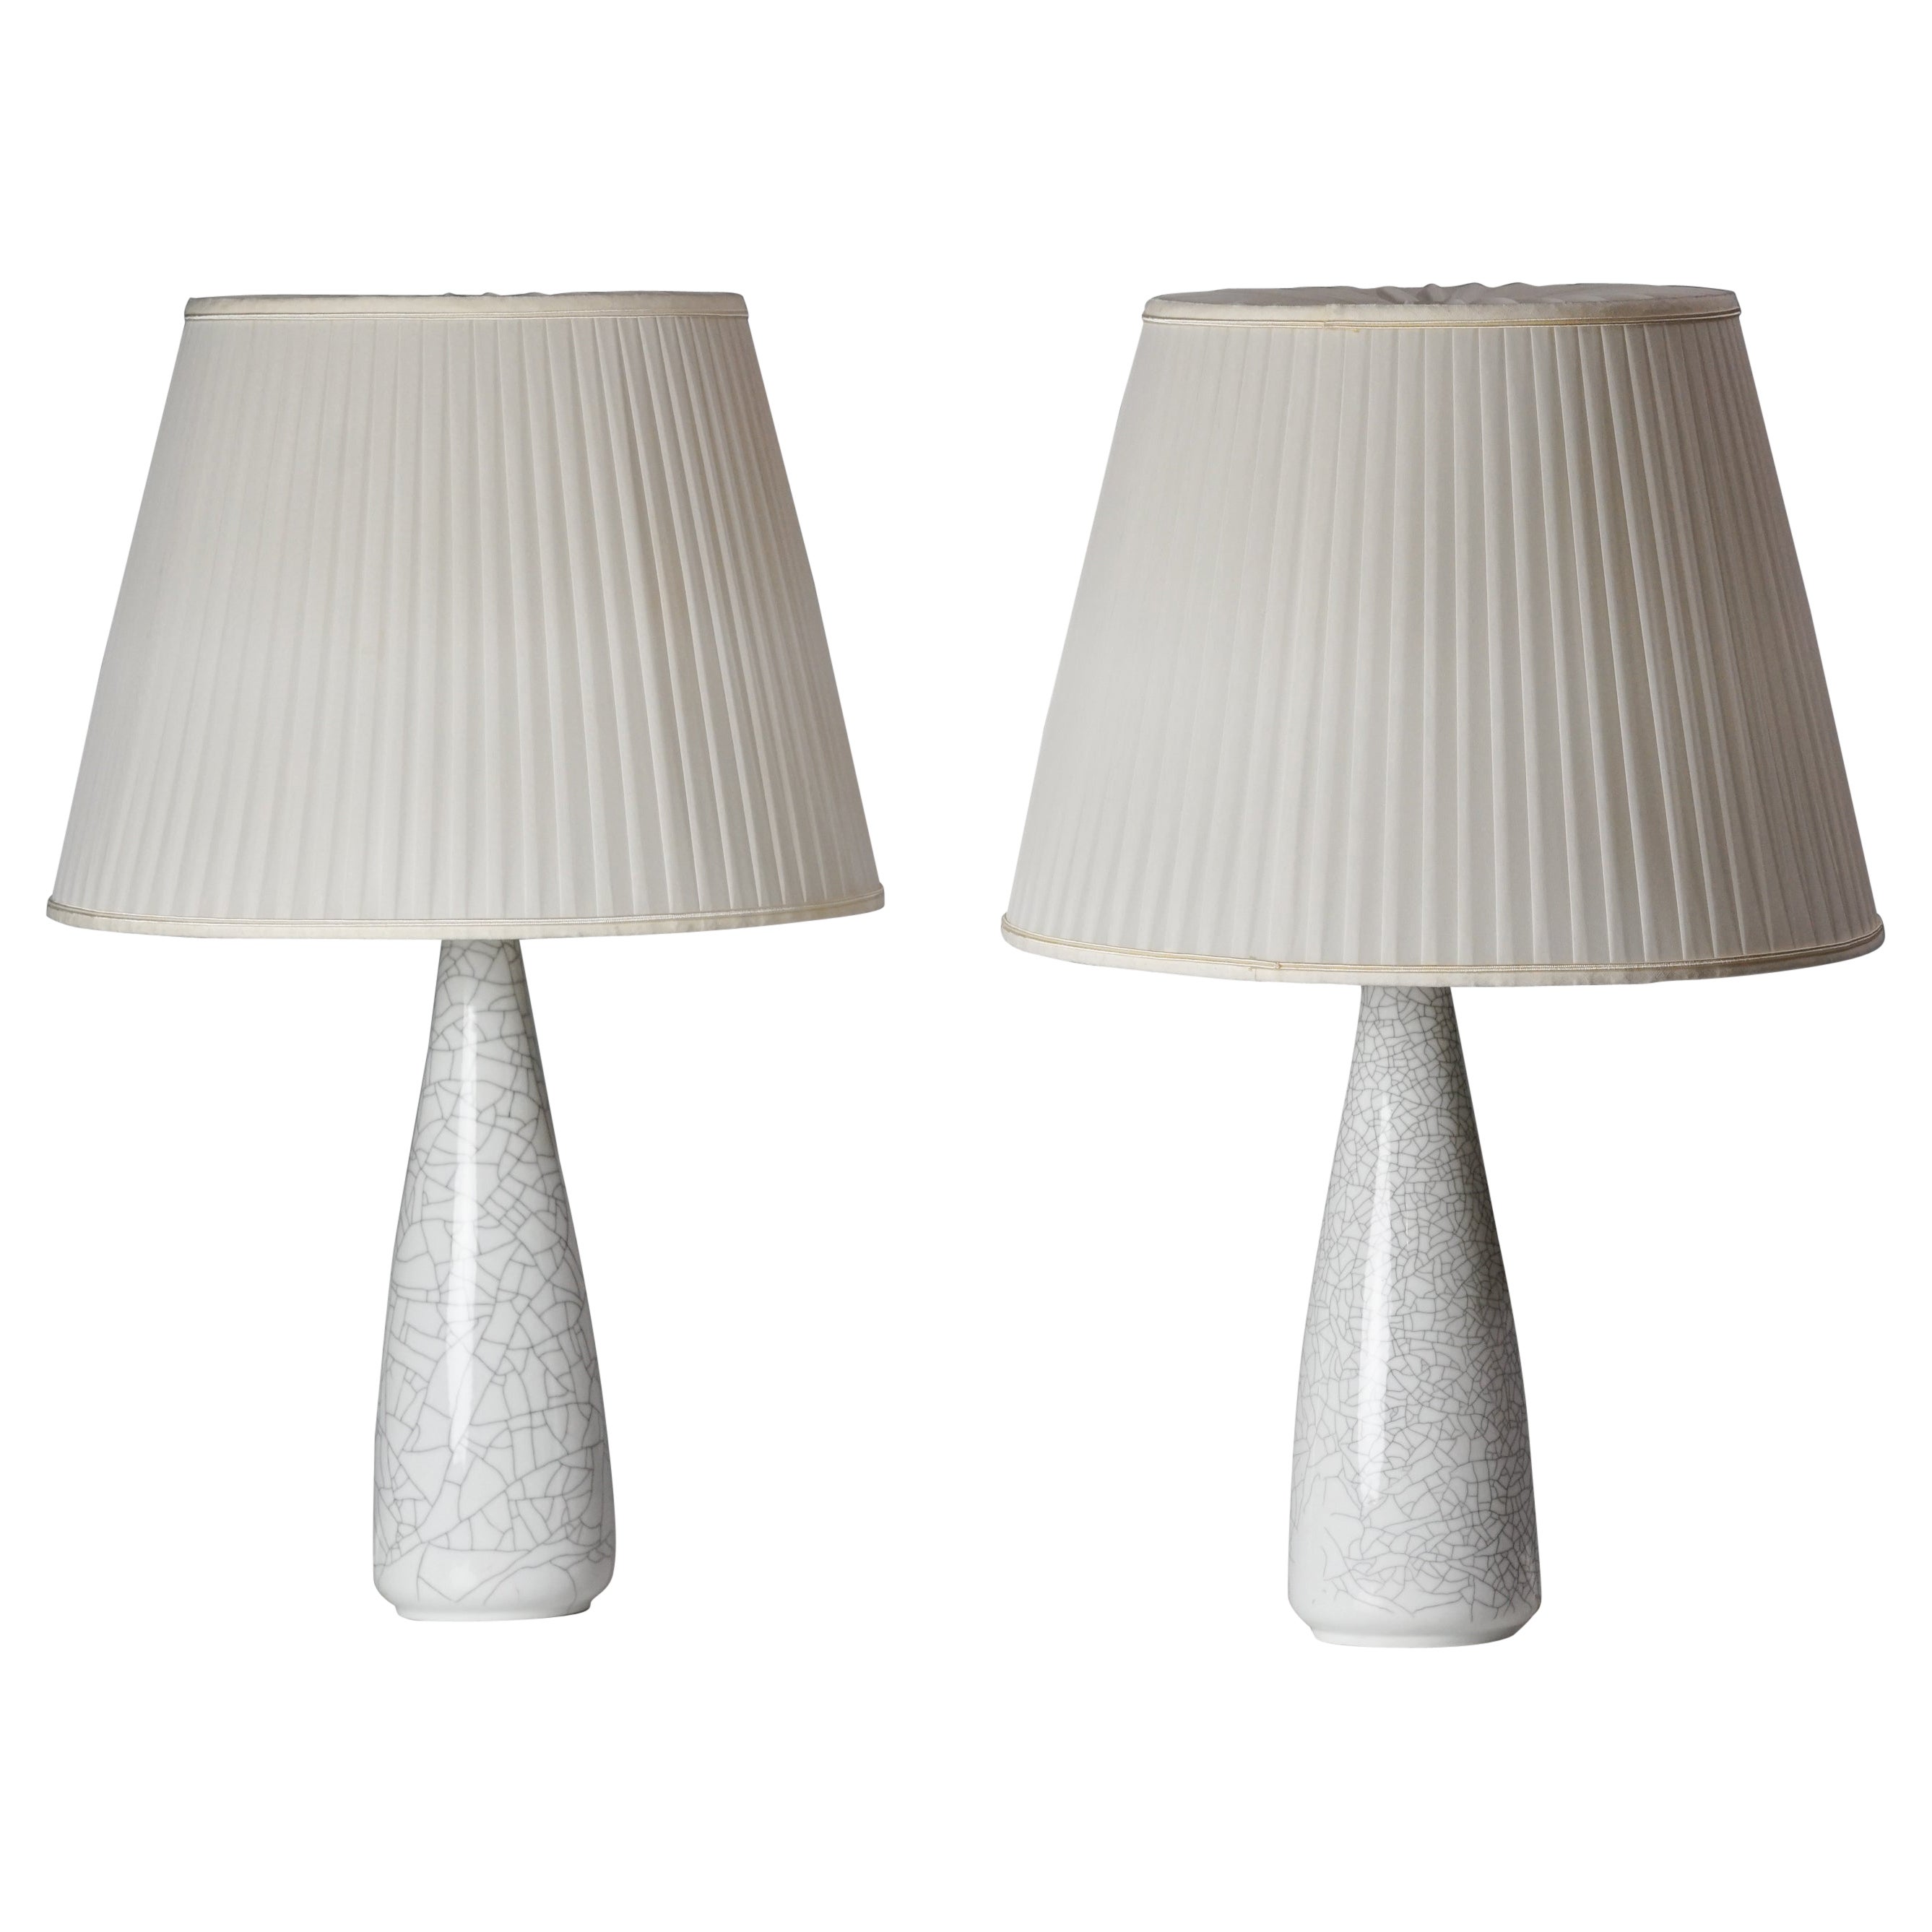 Pair of Enameled Ceramic Table Lamps by Toini Muona for Arabia, 1940s  For Sale